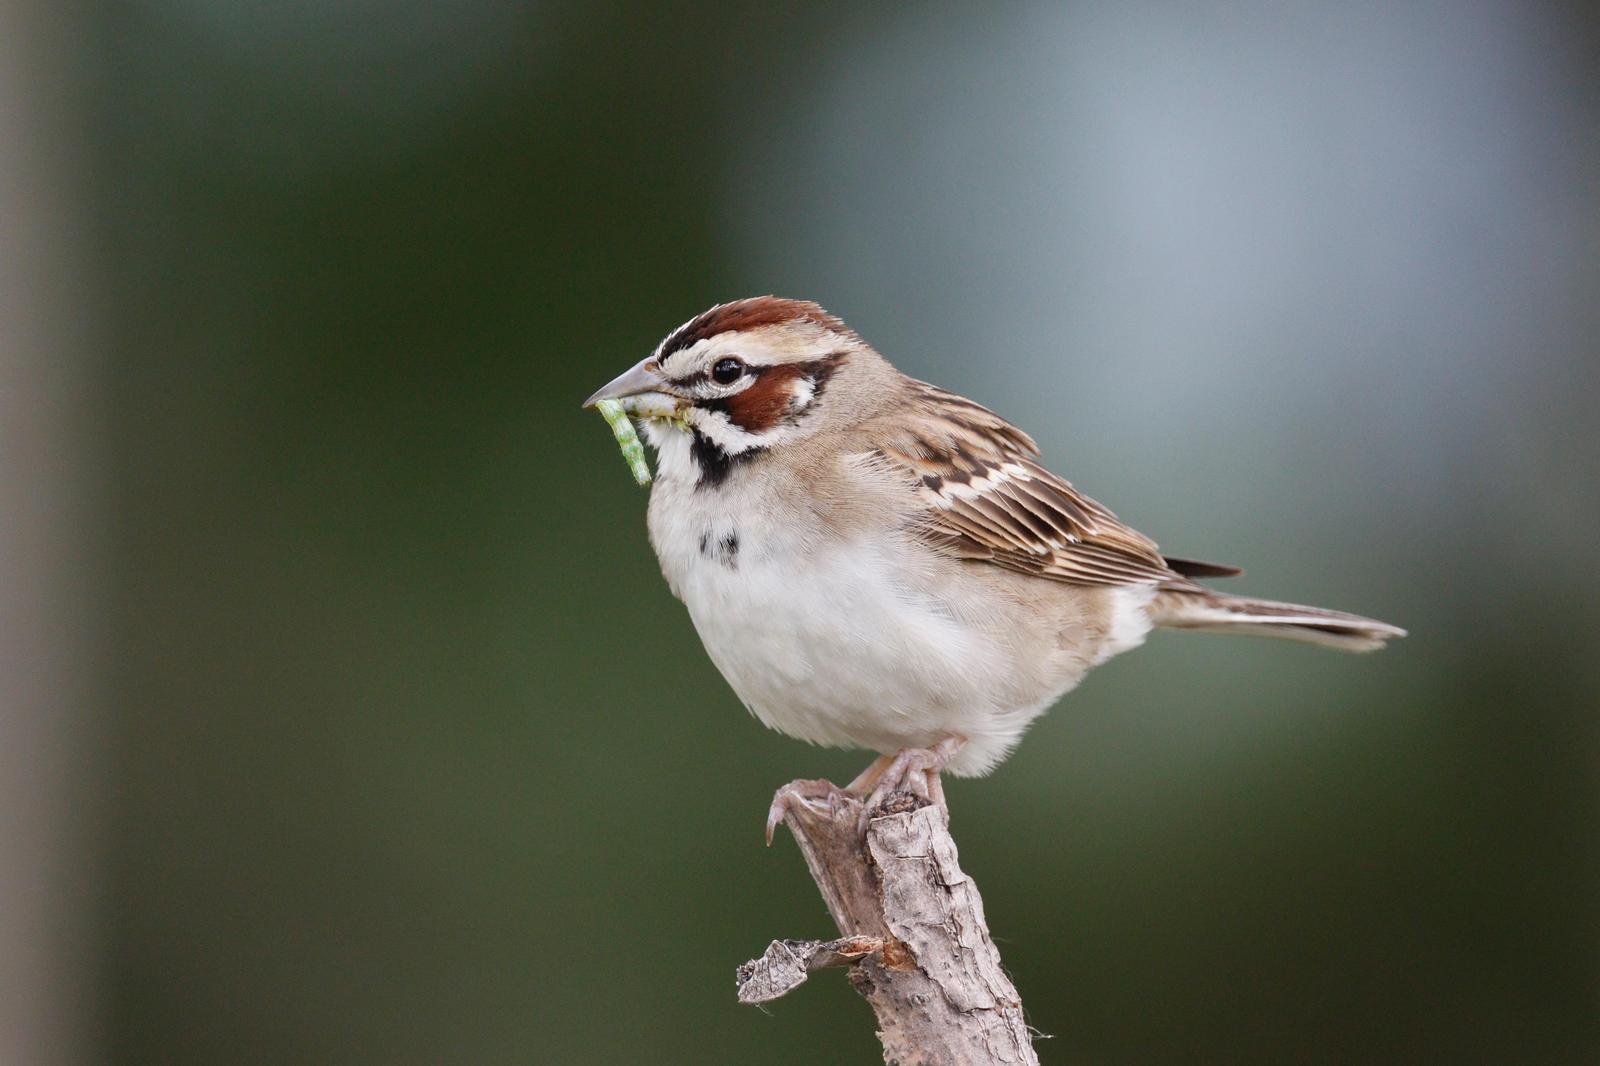 Lark Sparrow Photo by Emily Willoughby